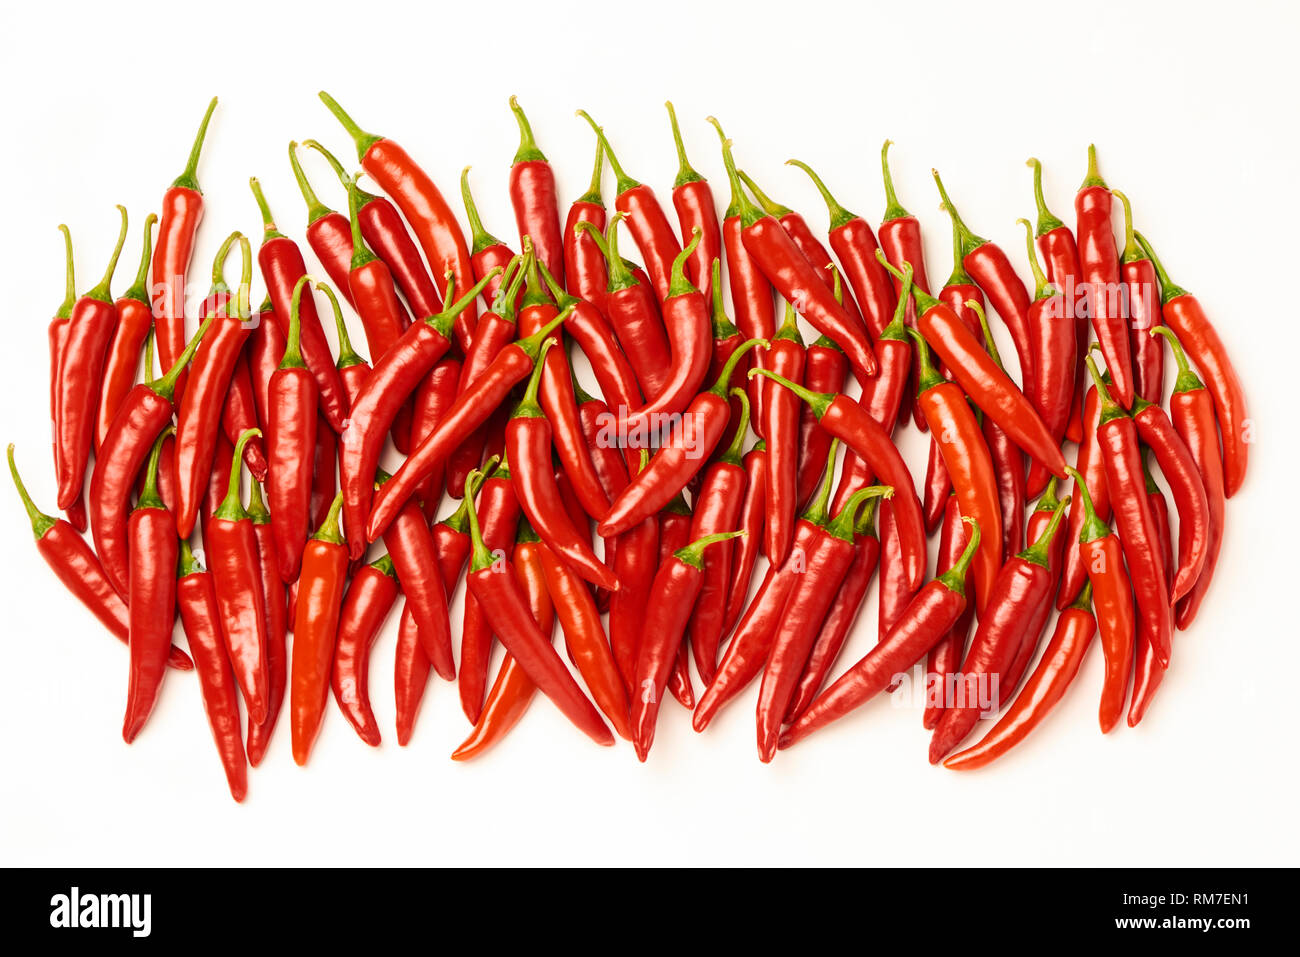 Red Hot Chili Peppers Stockfoto